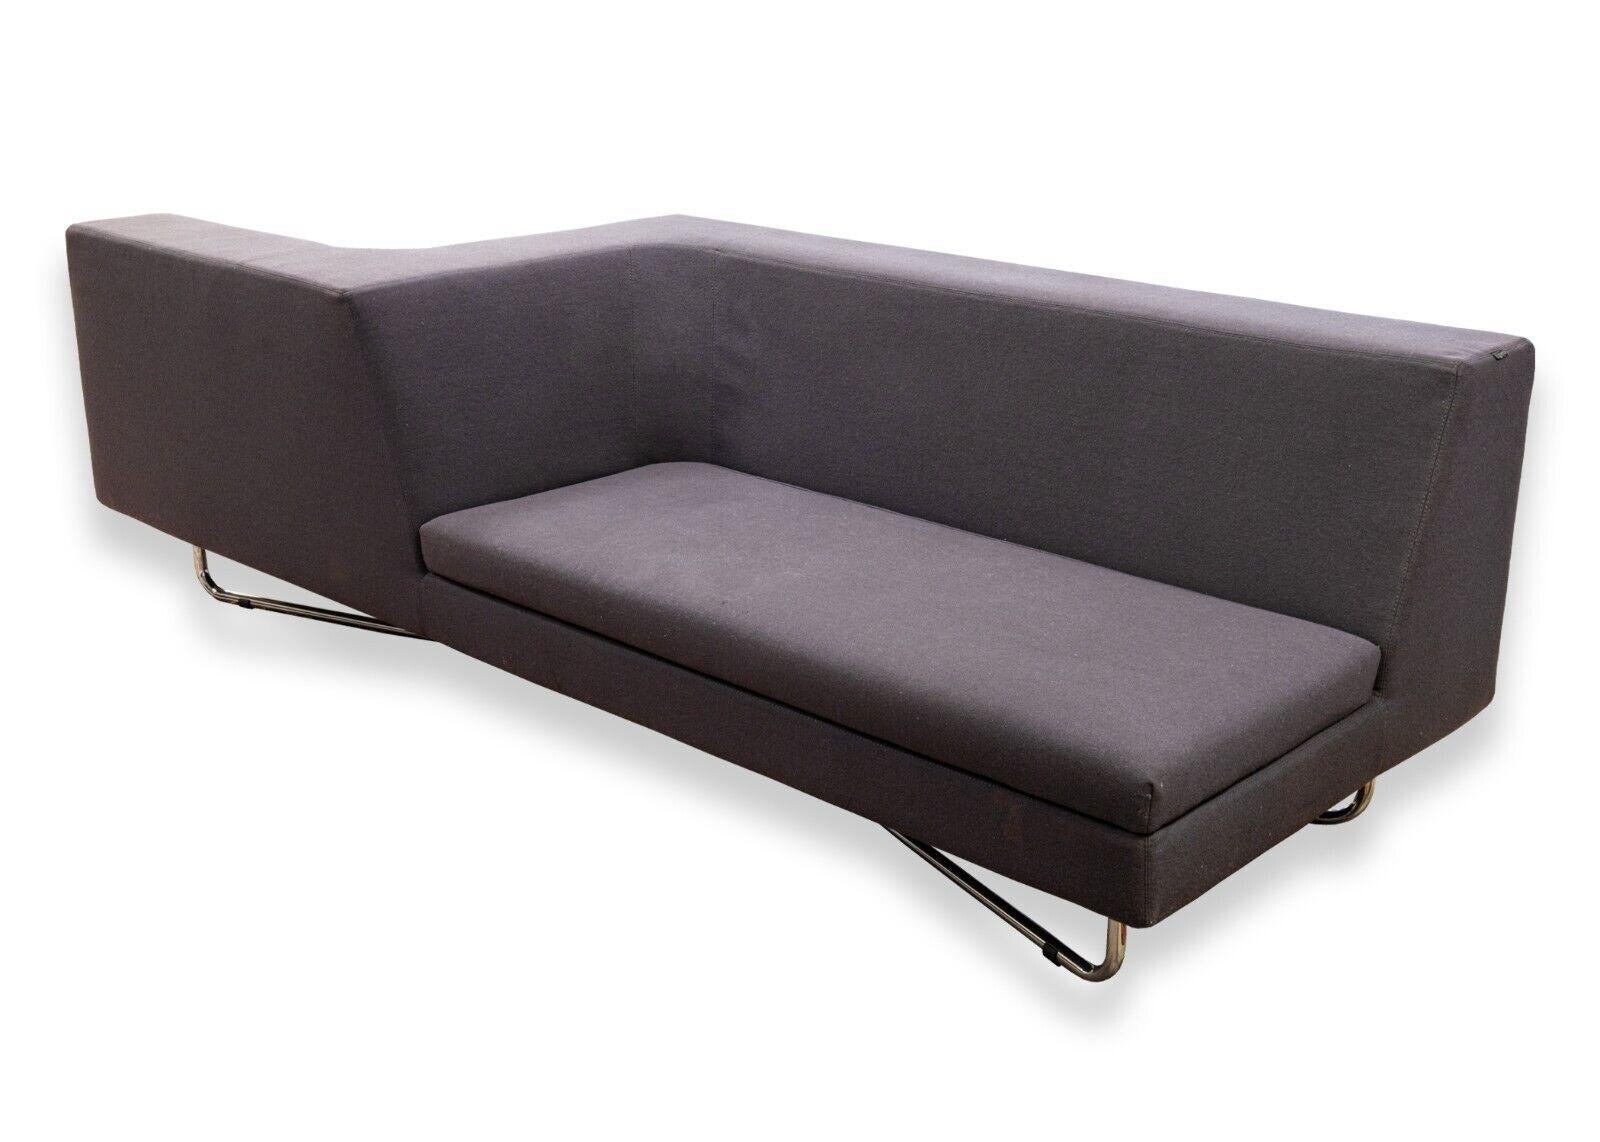 A pair of Victory left and right hand sofas by Cory Grosser for Frighetto. A fabulous pair of unique sofas featuring a mirrored left and right hand design on either sofa. These pieces have a full size sofa on one side, and on the opposing side sits